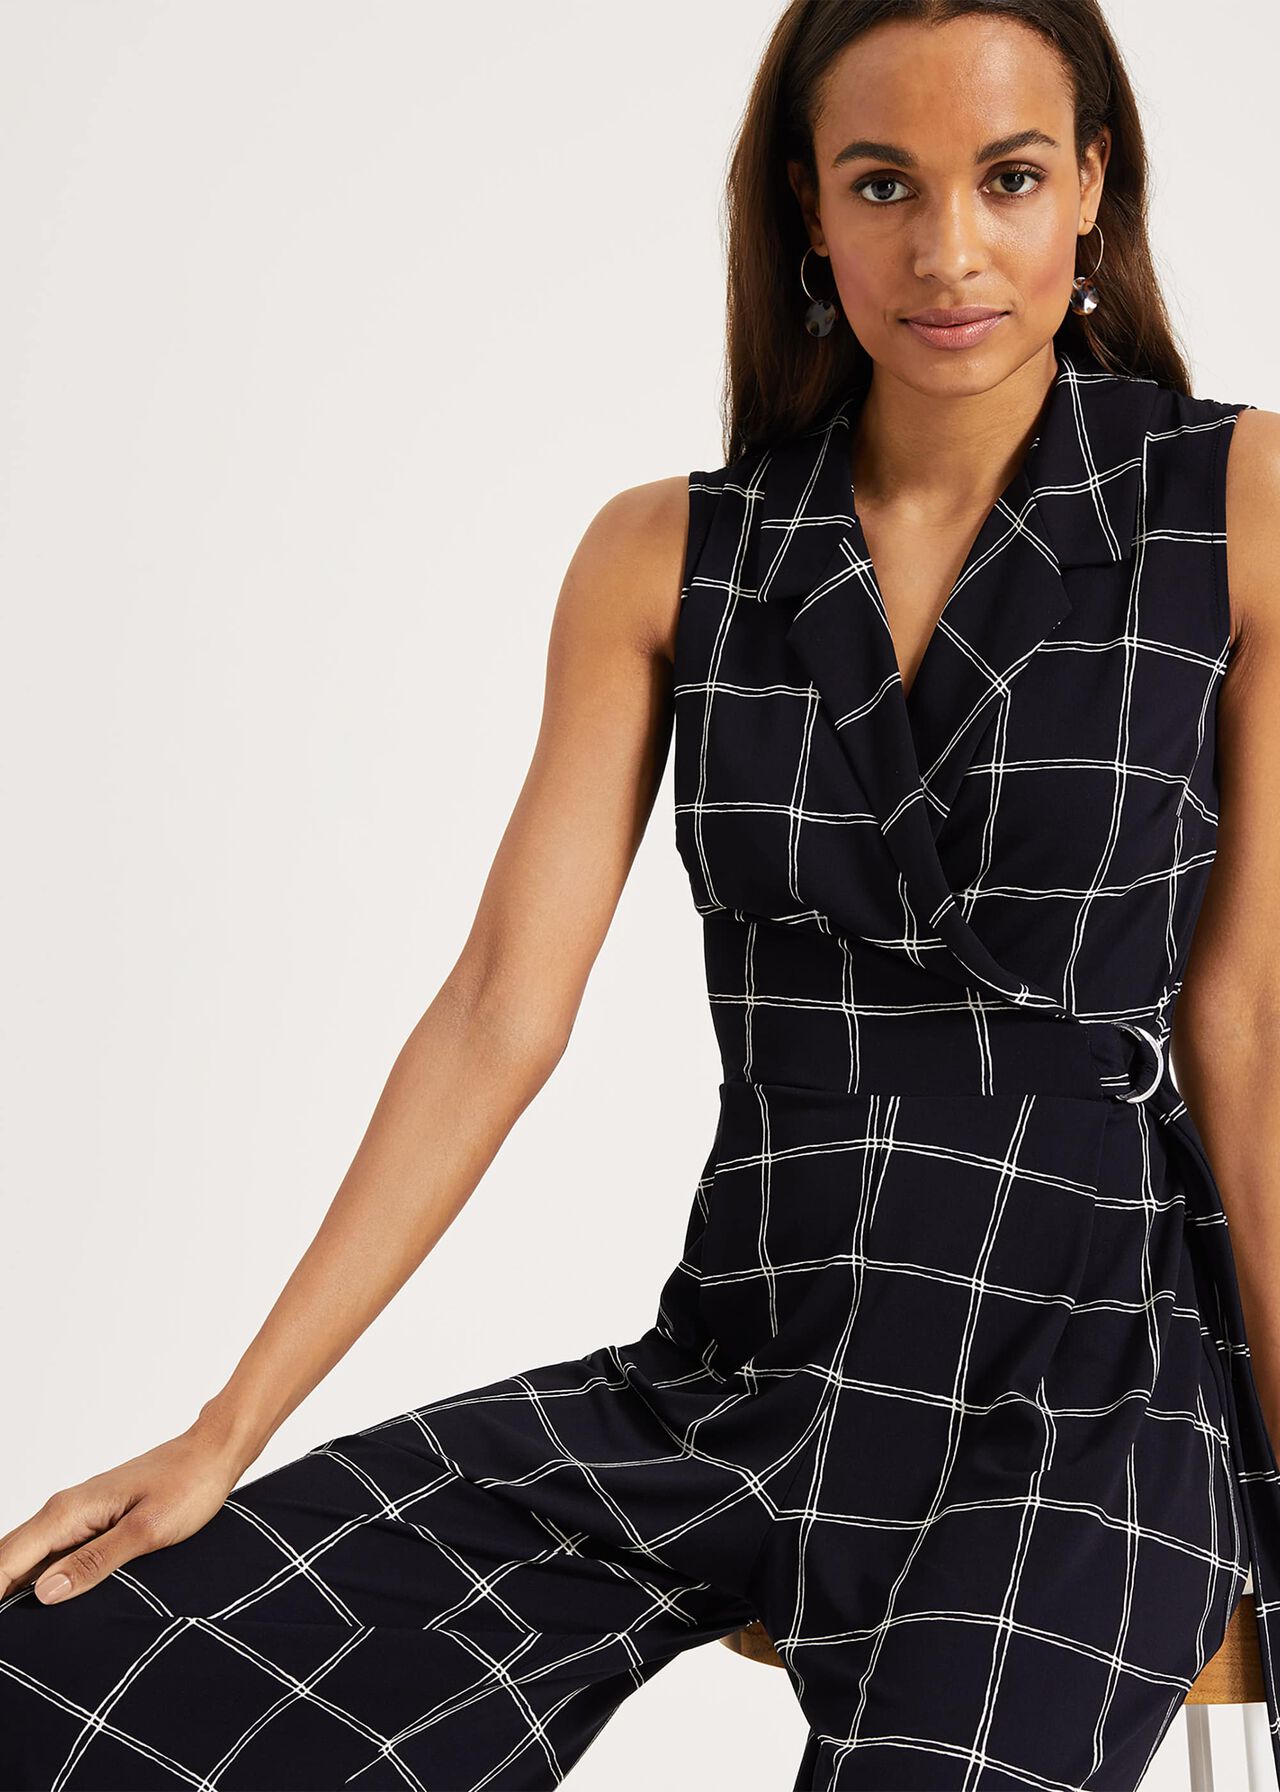 Cheskie Check Jumpsuit